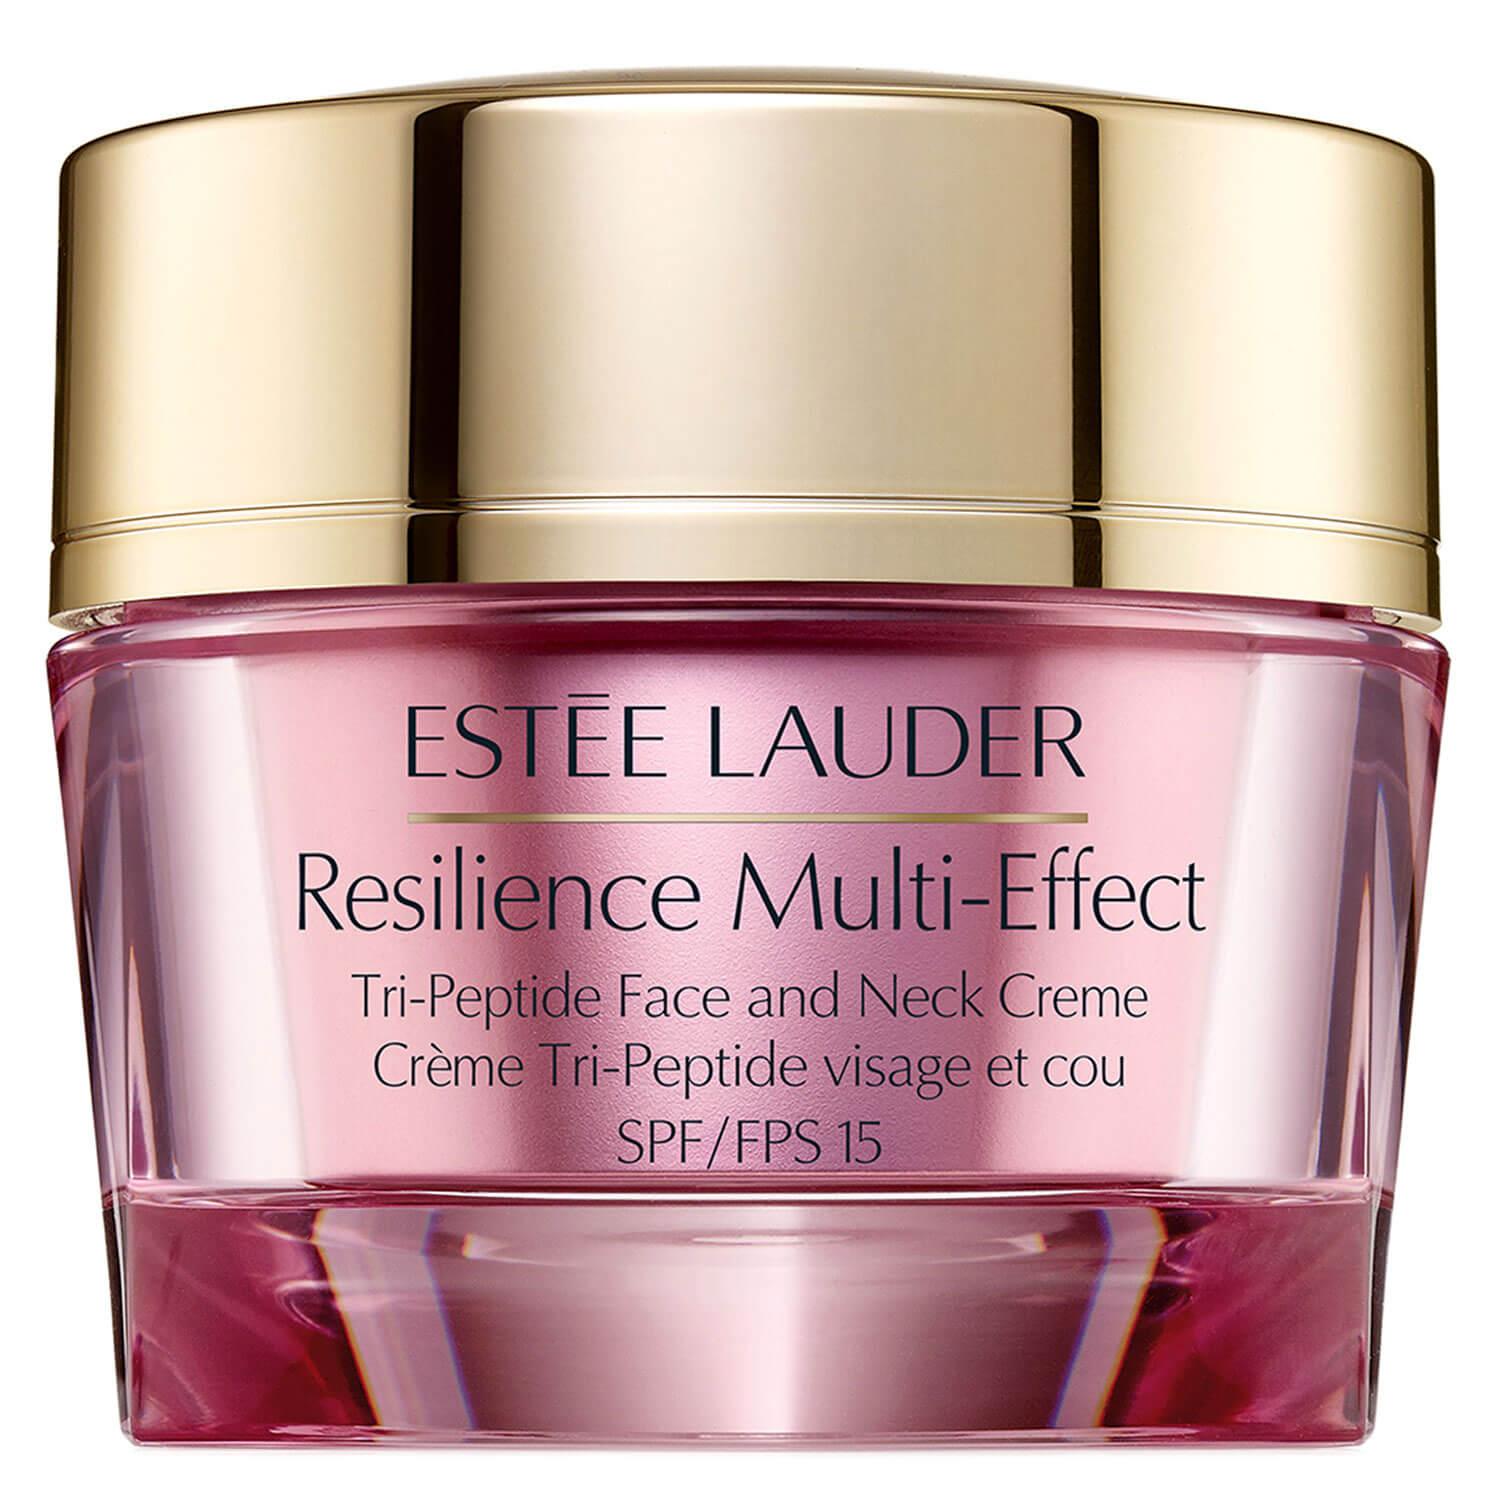 Resilience Multi-Effect - Tri-Peptide Face and Neck Creme N/C SPF15